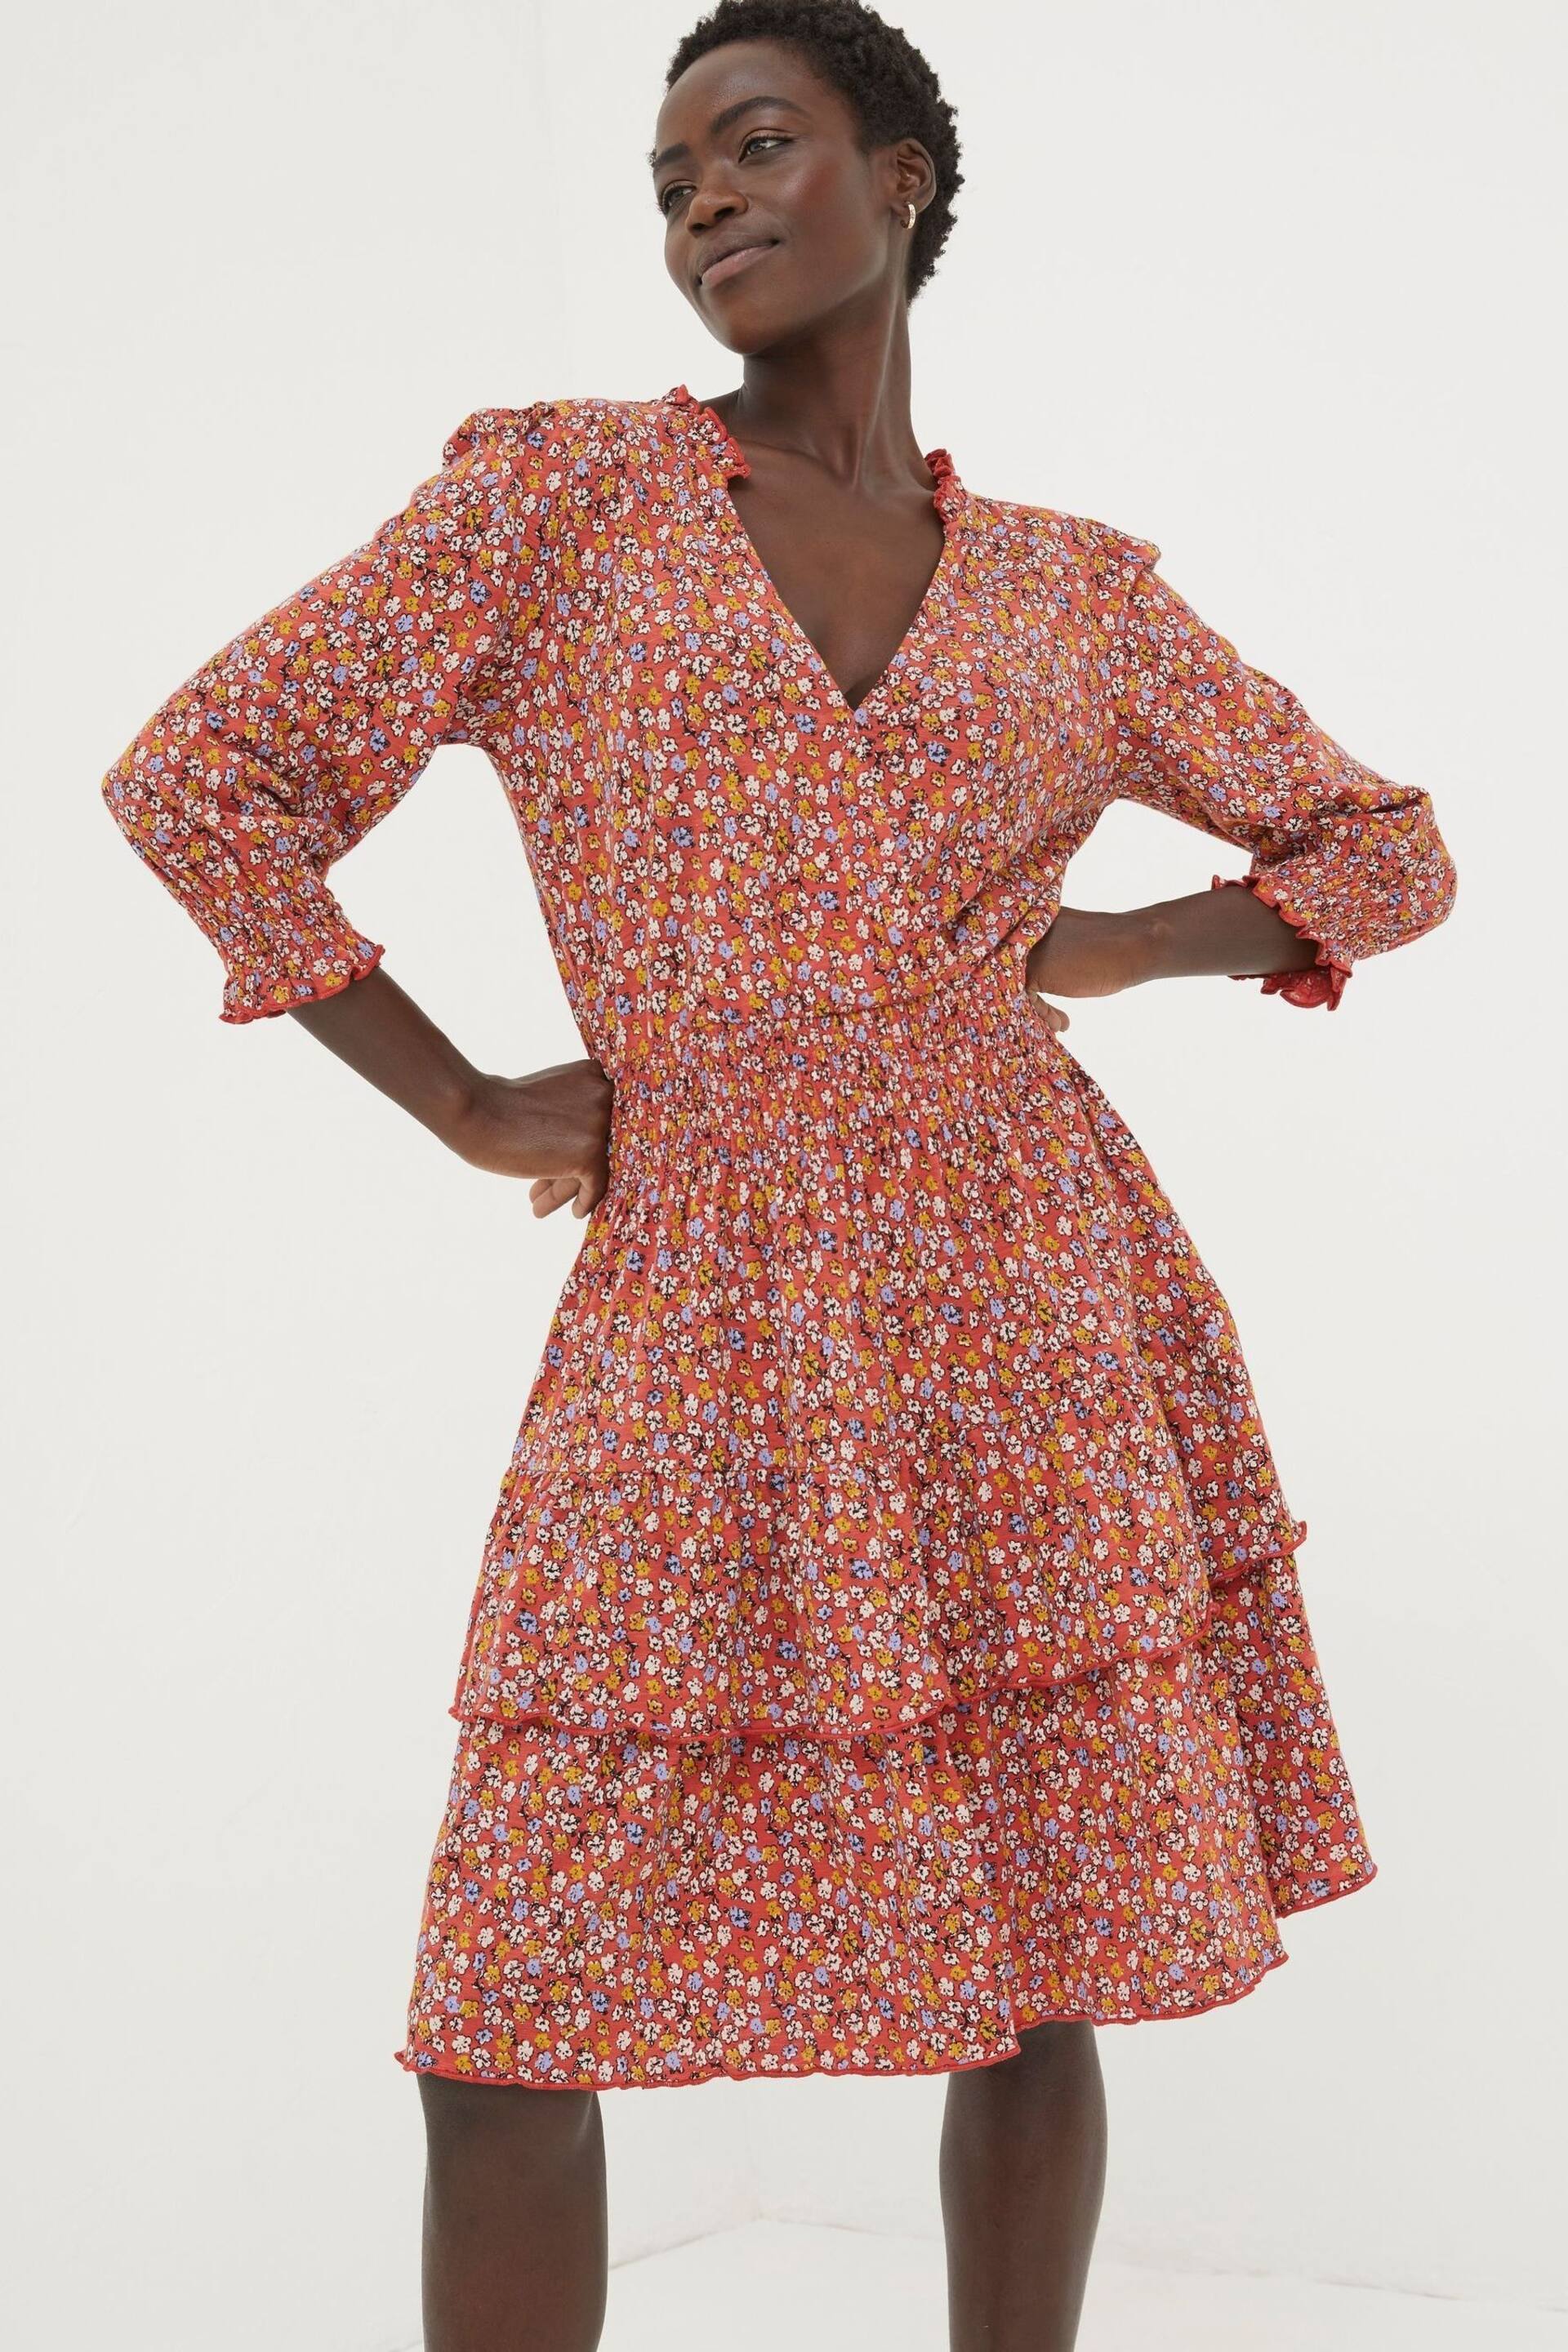 FatFace Red Amba Gradient Floral Jersey Dress - Image 1 of 5